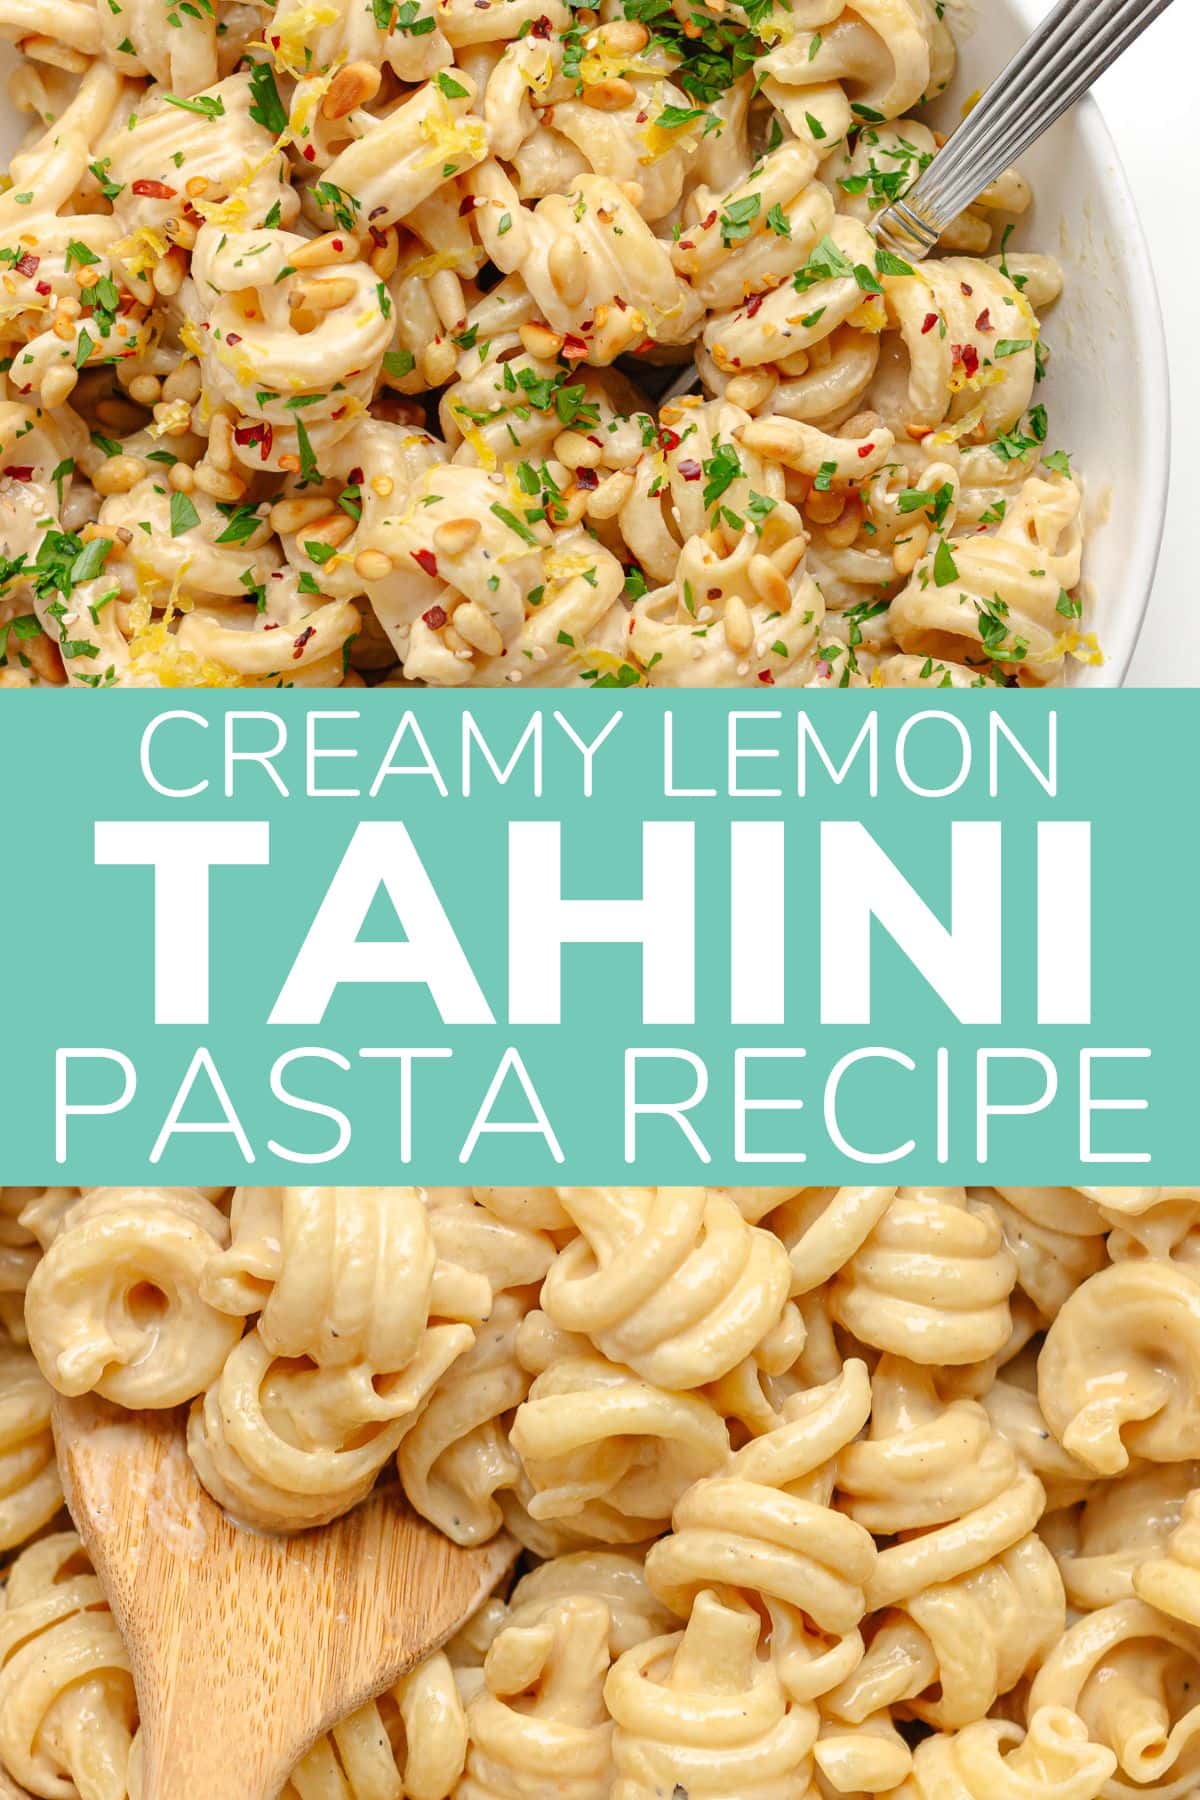 Photo collage graphic of tahini pasta with text overlay that reads "Creamy Lemon Tahini Pasta Recipe".